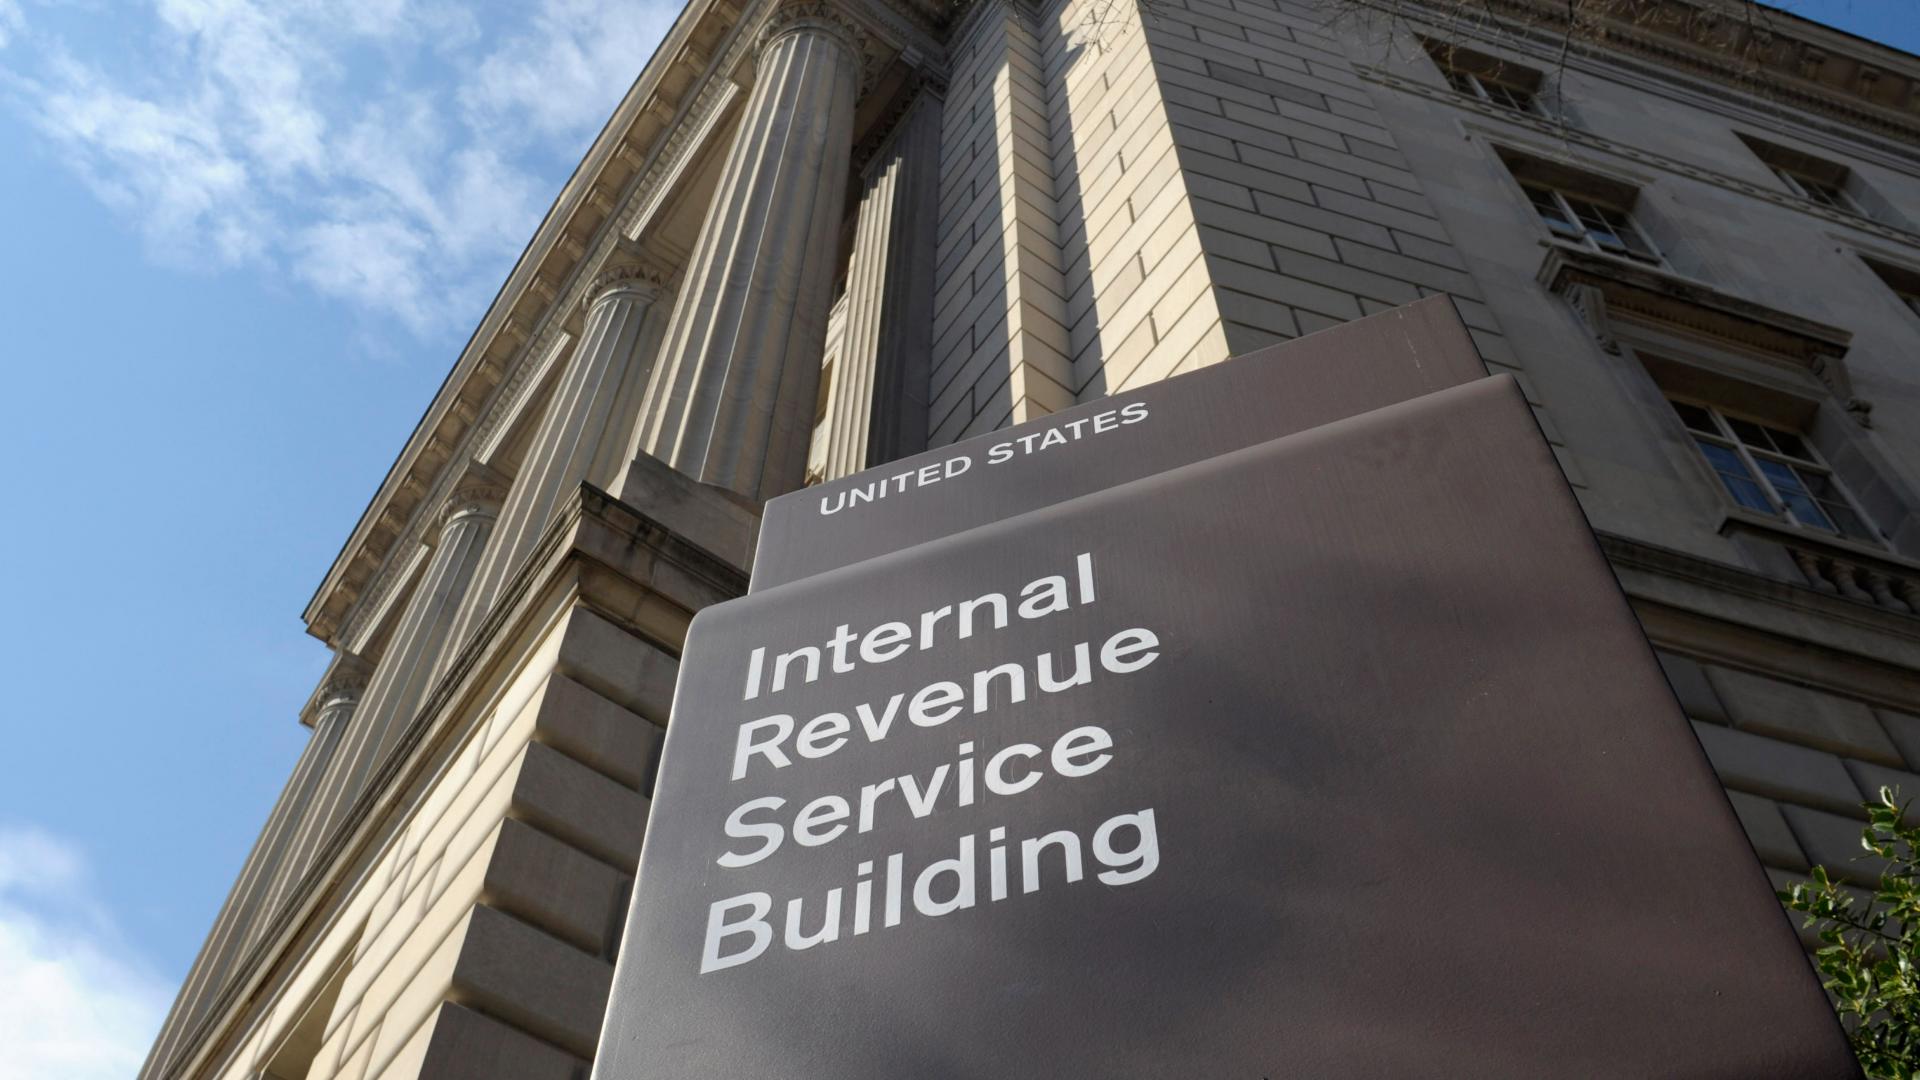 The IRS Cincinnati office says it is still seeing fraudulent tax forms related to pandemic financial assistance programs.